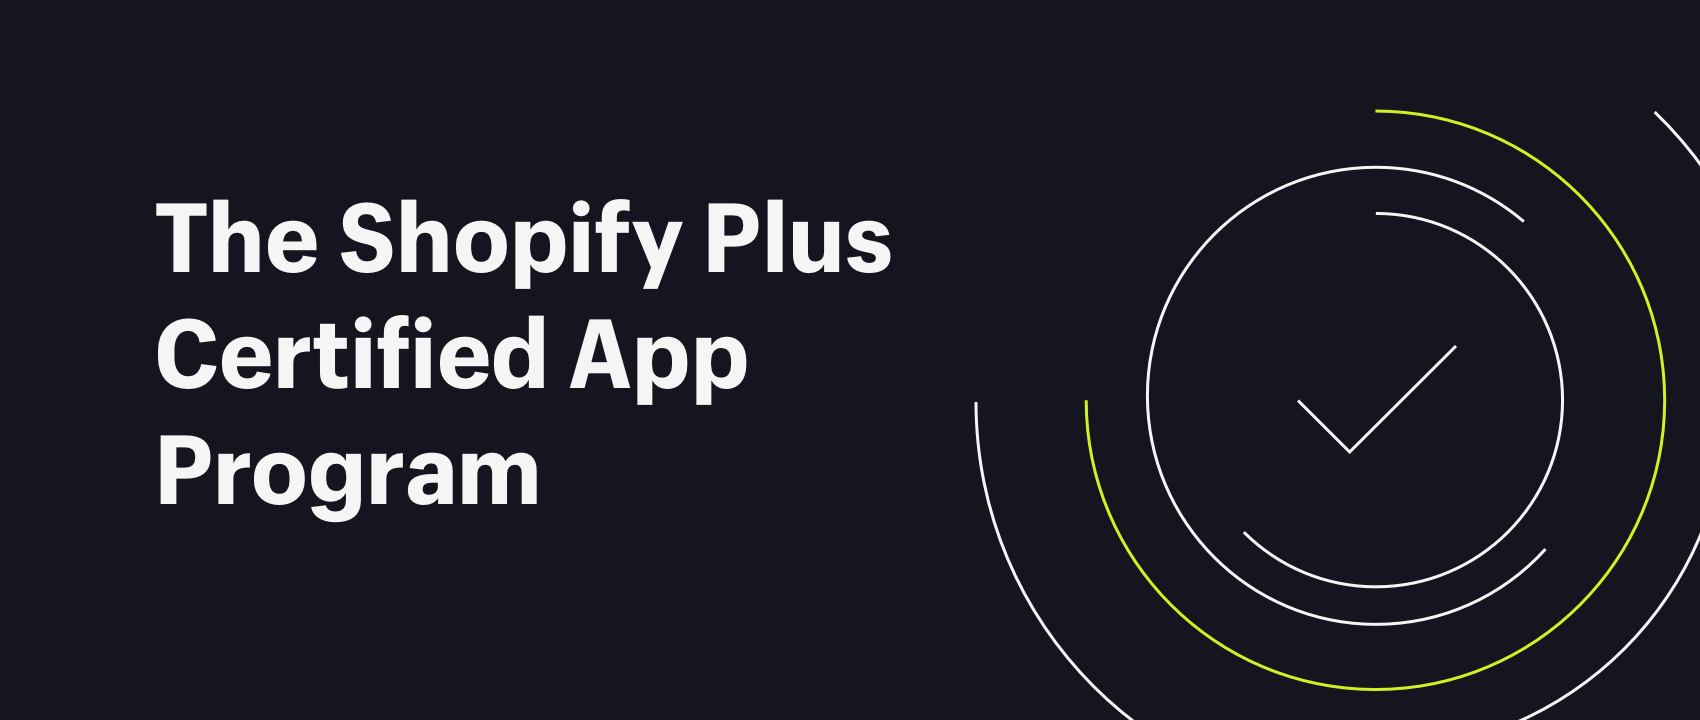 Grow is Shopify Plus Certified—Now Go Build an eCommerce Dashboard